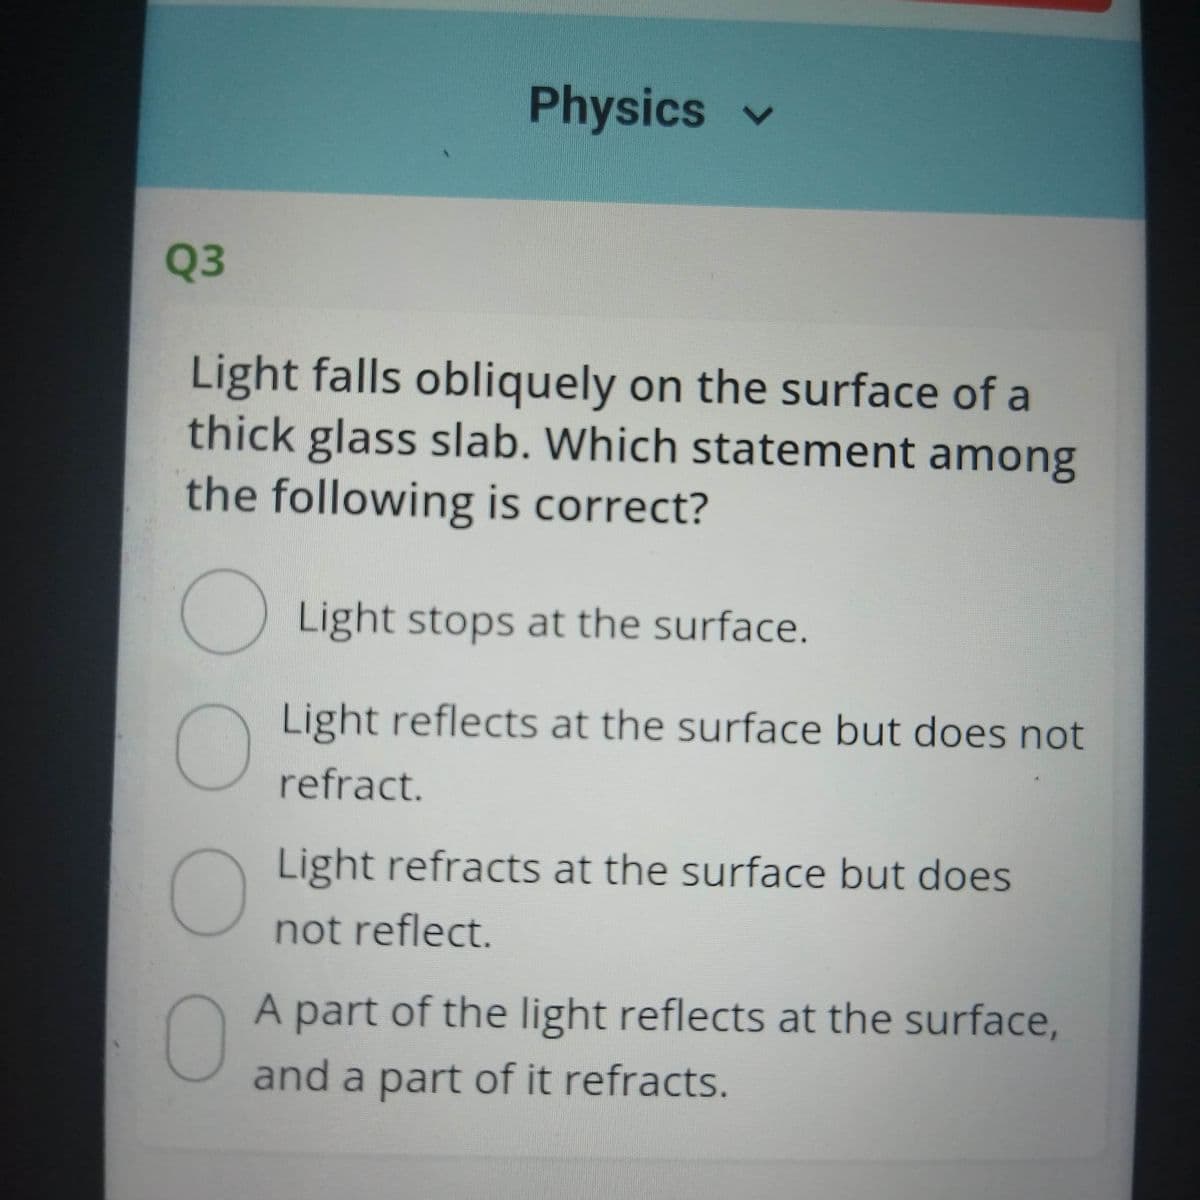 Physics v
Q3
Light falls obliquely on the surface of a
thick glass slab. Which statement among
the following is correct?
Light stops at the surface.
Light reflects at the surface but does not
refract.
Light refracts at the surface but does
not reflect.
A part of the light reflects at the surface,
and a part of it refracts.
